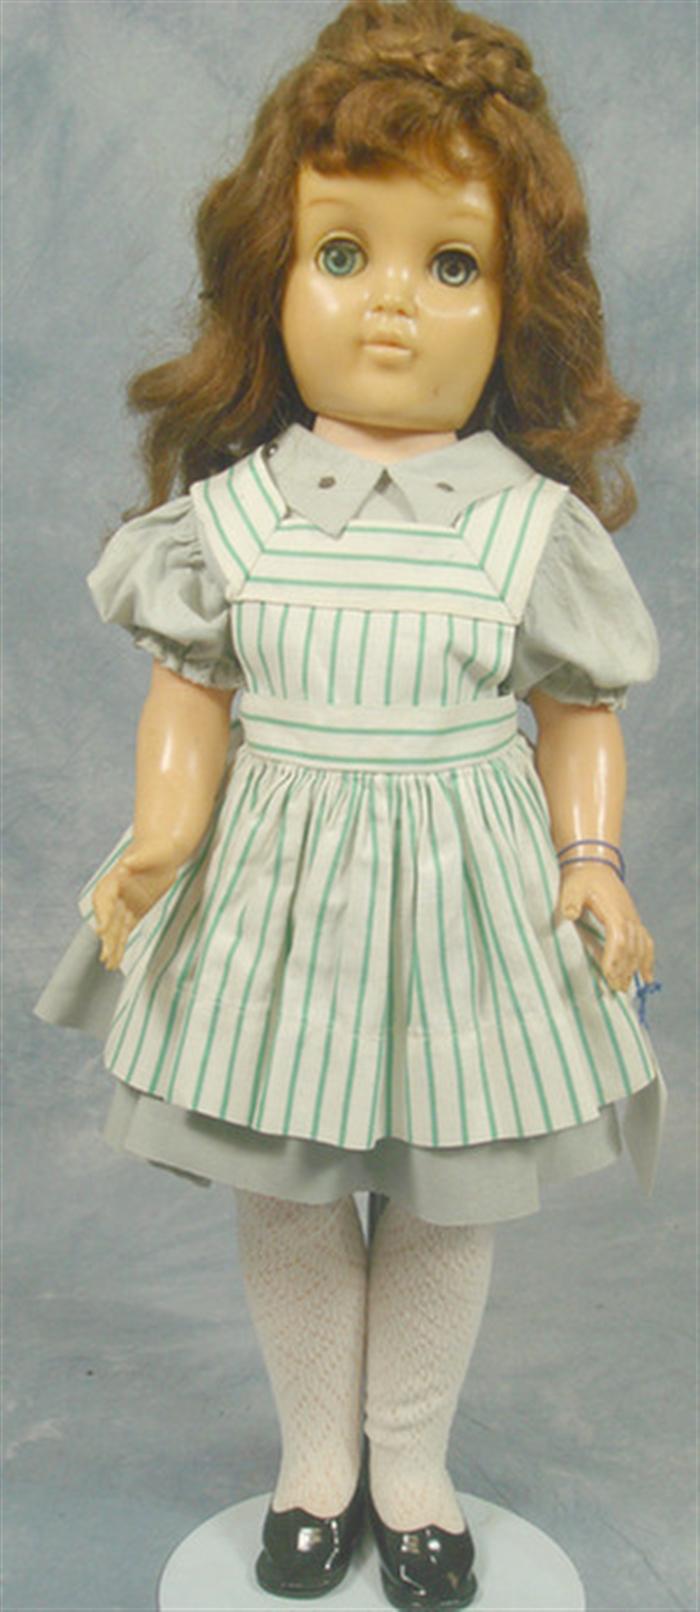 Harriet Hubbard Ayer Doll Ideal 3cacb